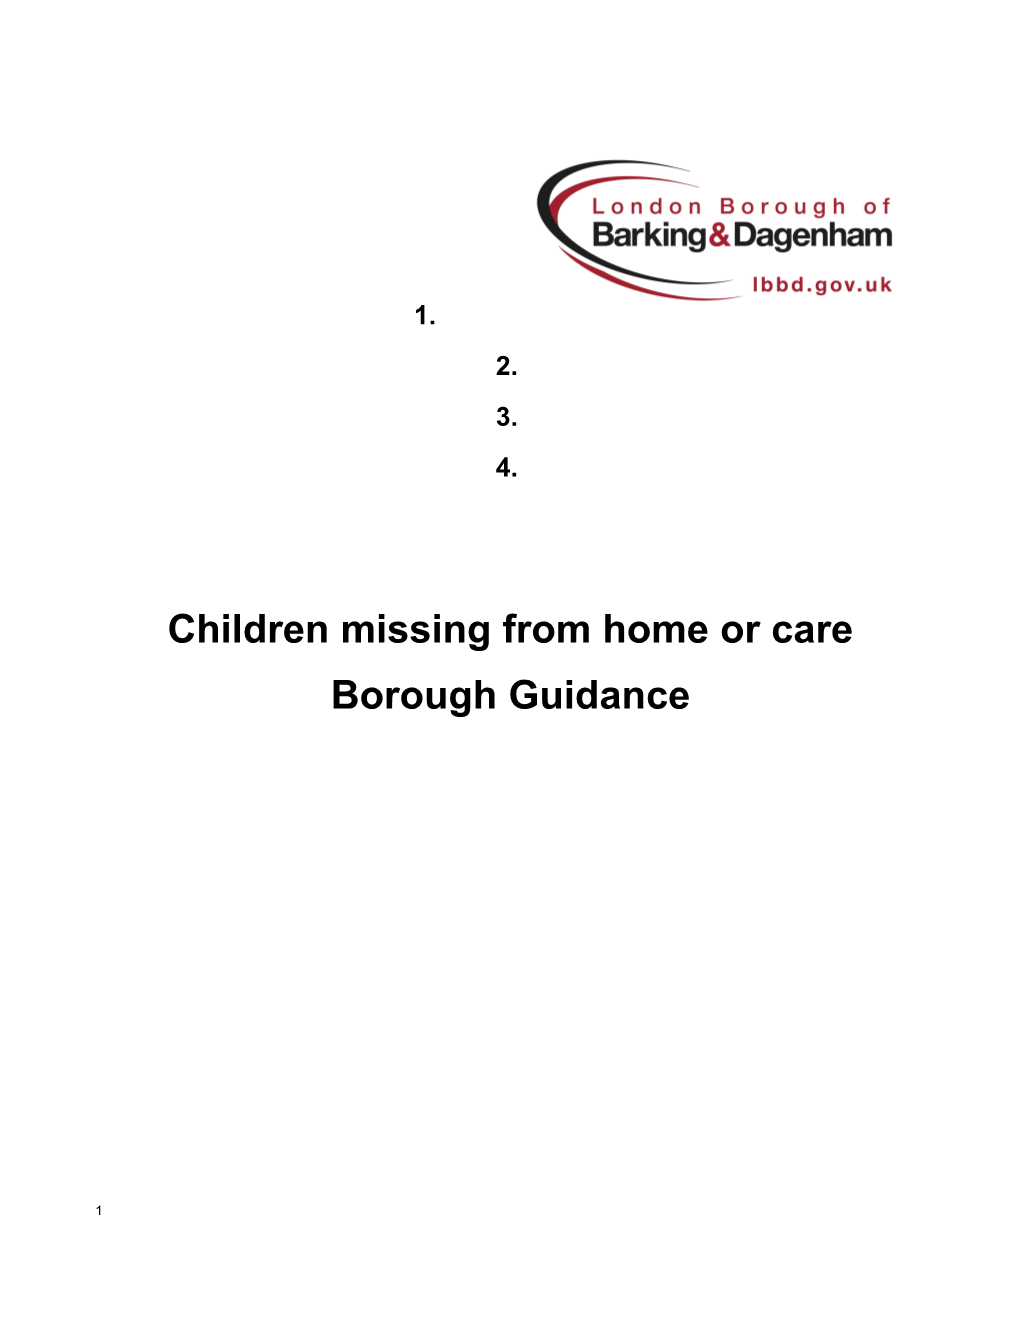 Children Missing from Home Or Care